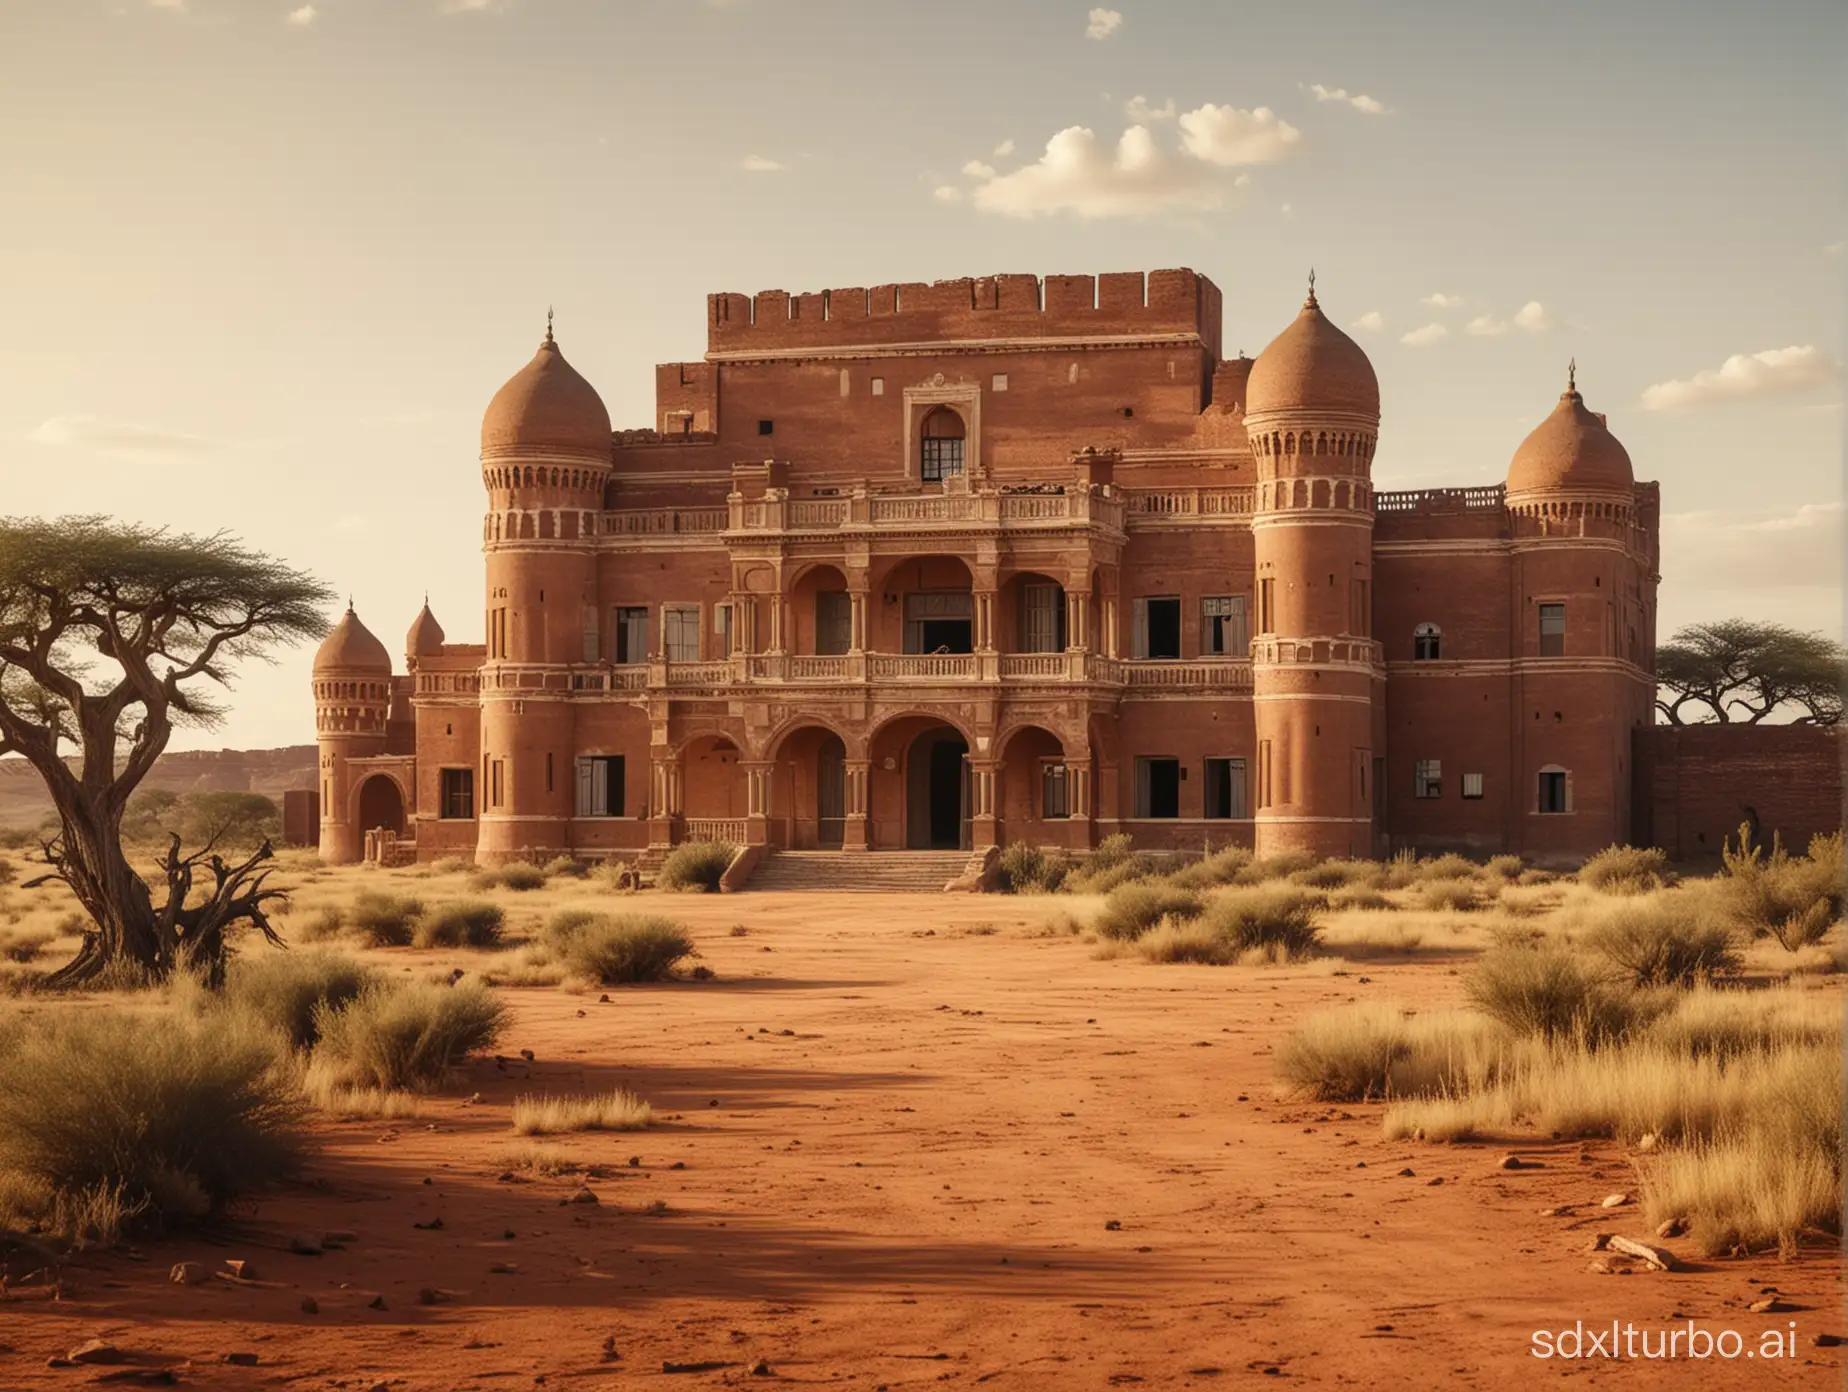 Majestic-Palace-of-Carondelet-Standing-Tall-amidst-the-African-Plains